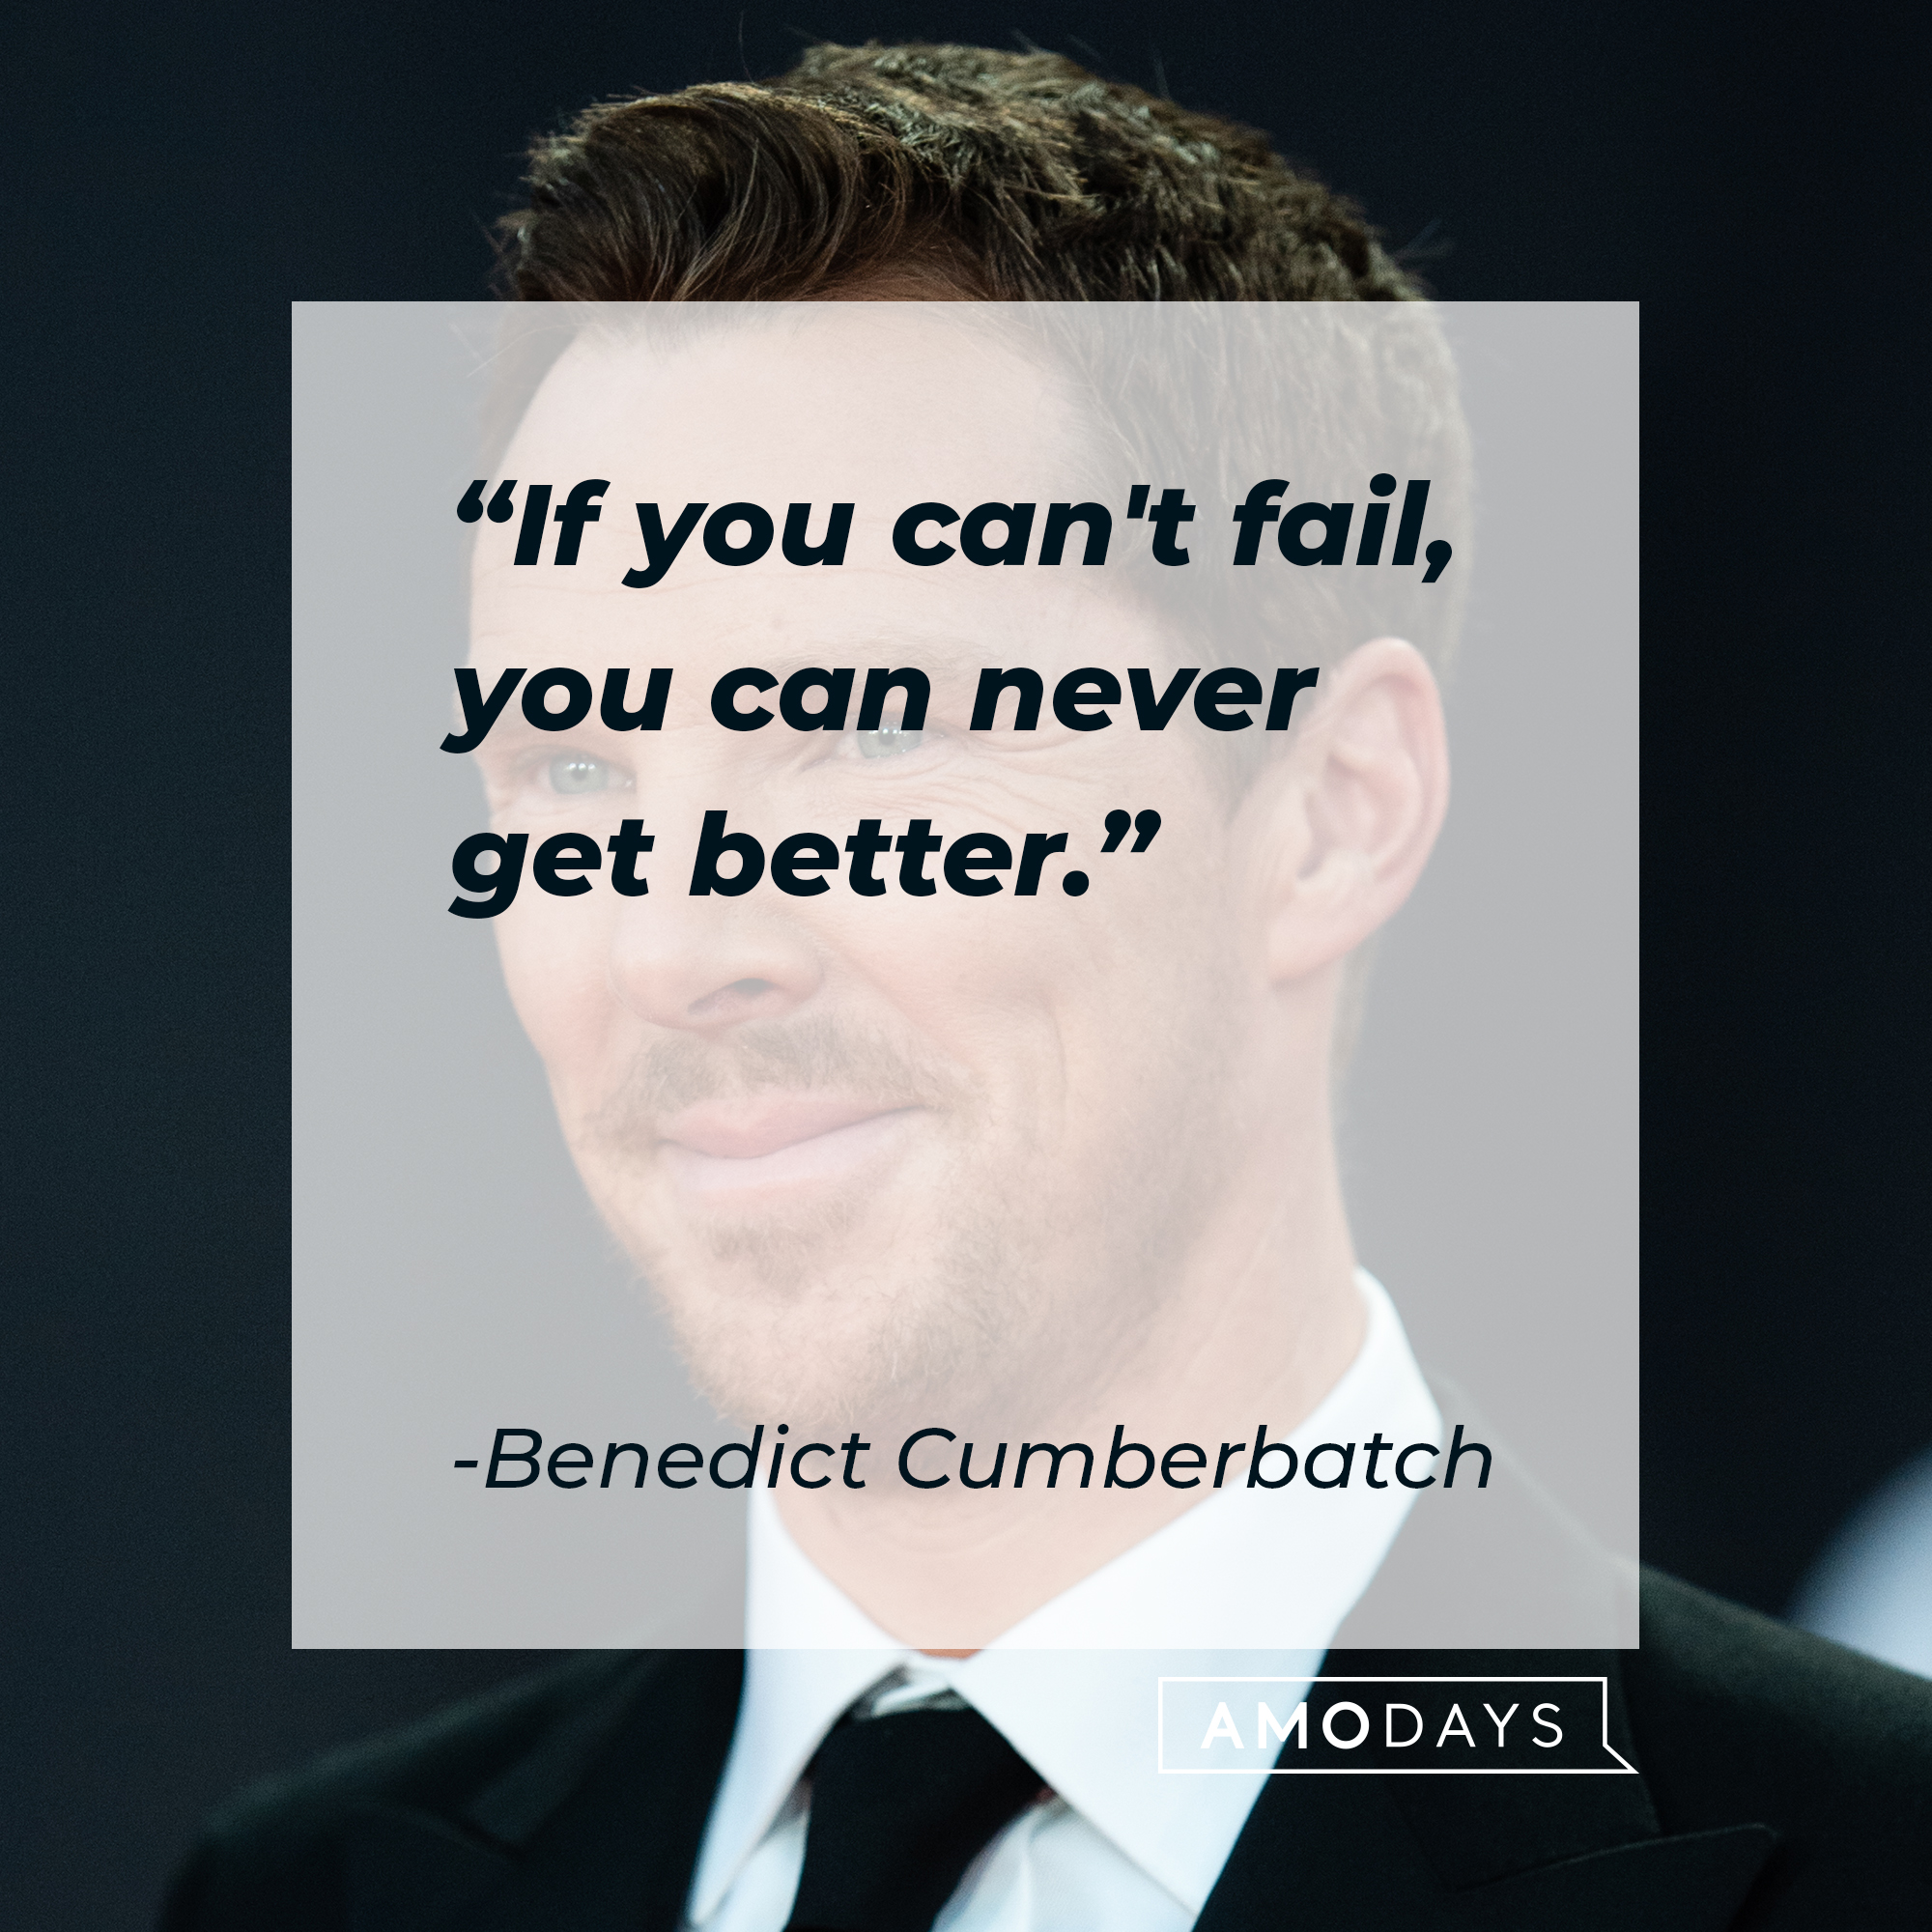 Benedict Cumberbatch, with his quote: “If you can't fail, you can never get better.” | Source: Getty Images